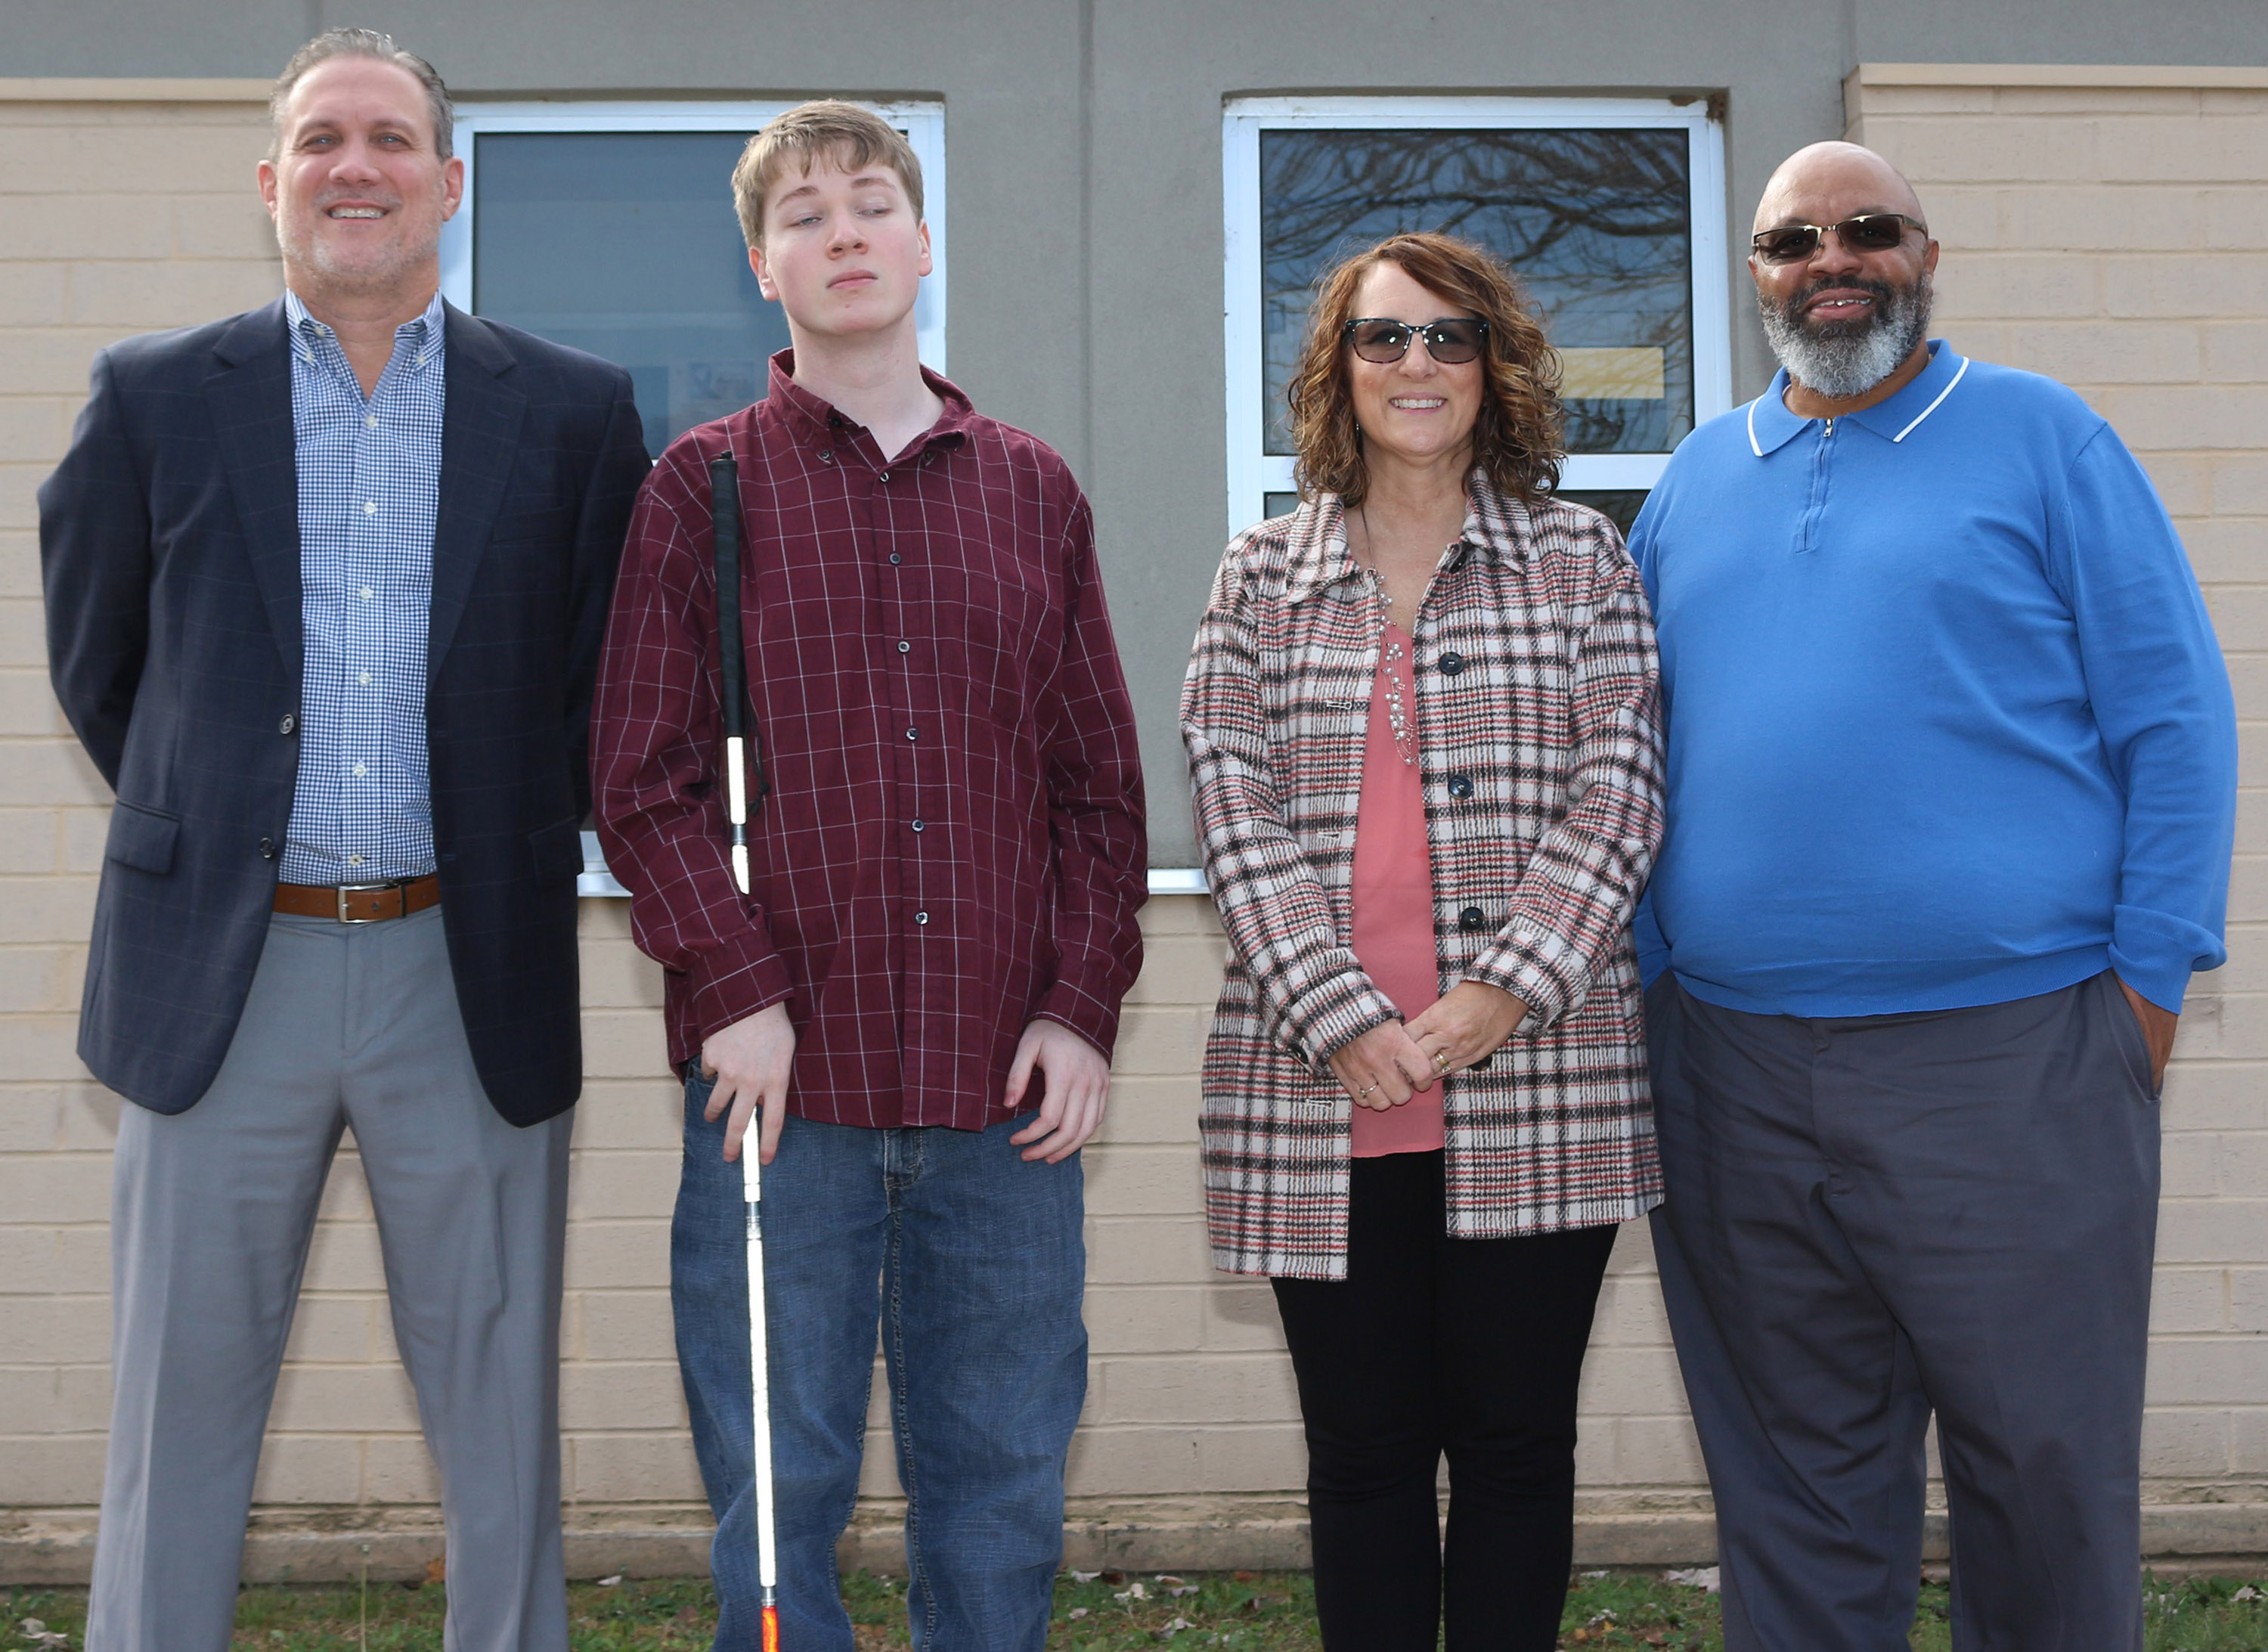 (From left) Mark Upton, program director and instructor of Marketing Management; GNTC student Sean Mullins; Tammy Pence, Workforce Innovation and Opportunity Act (WIOA) youth specialist; and Vince Stalling, WIOA Youth Services coordinator.